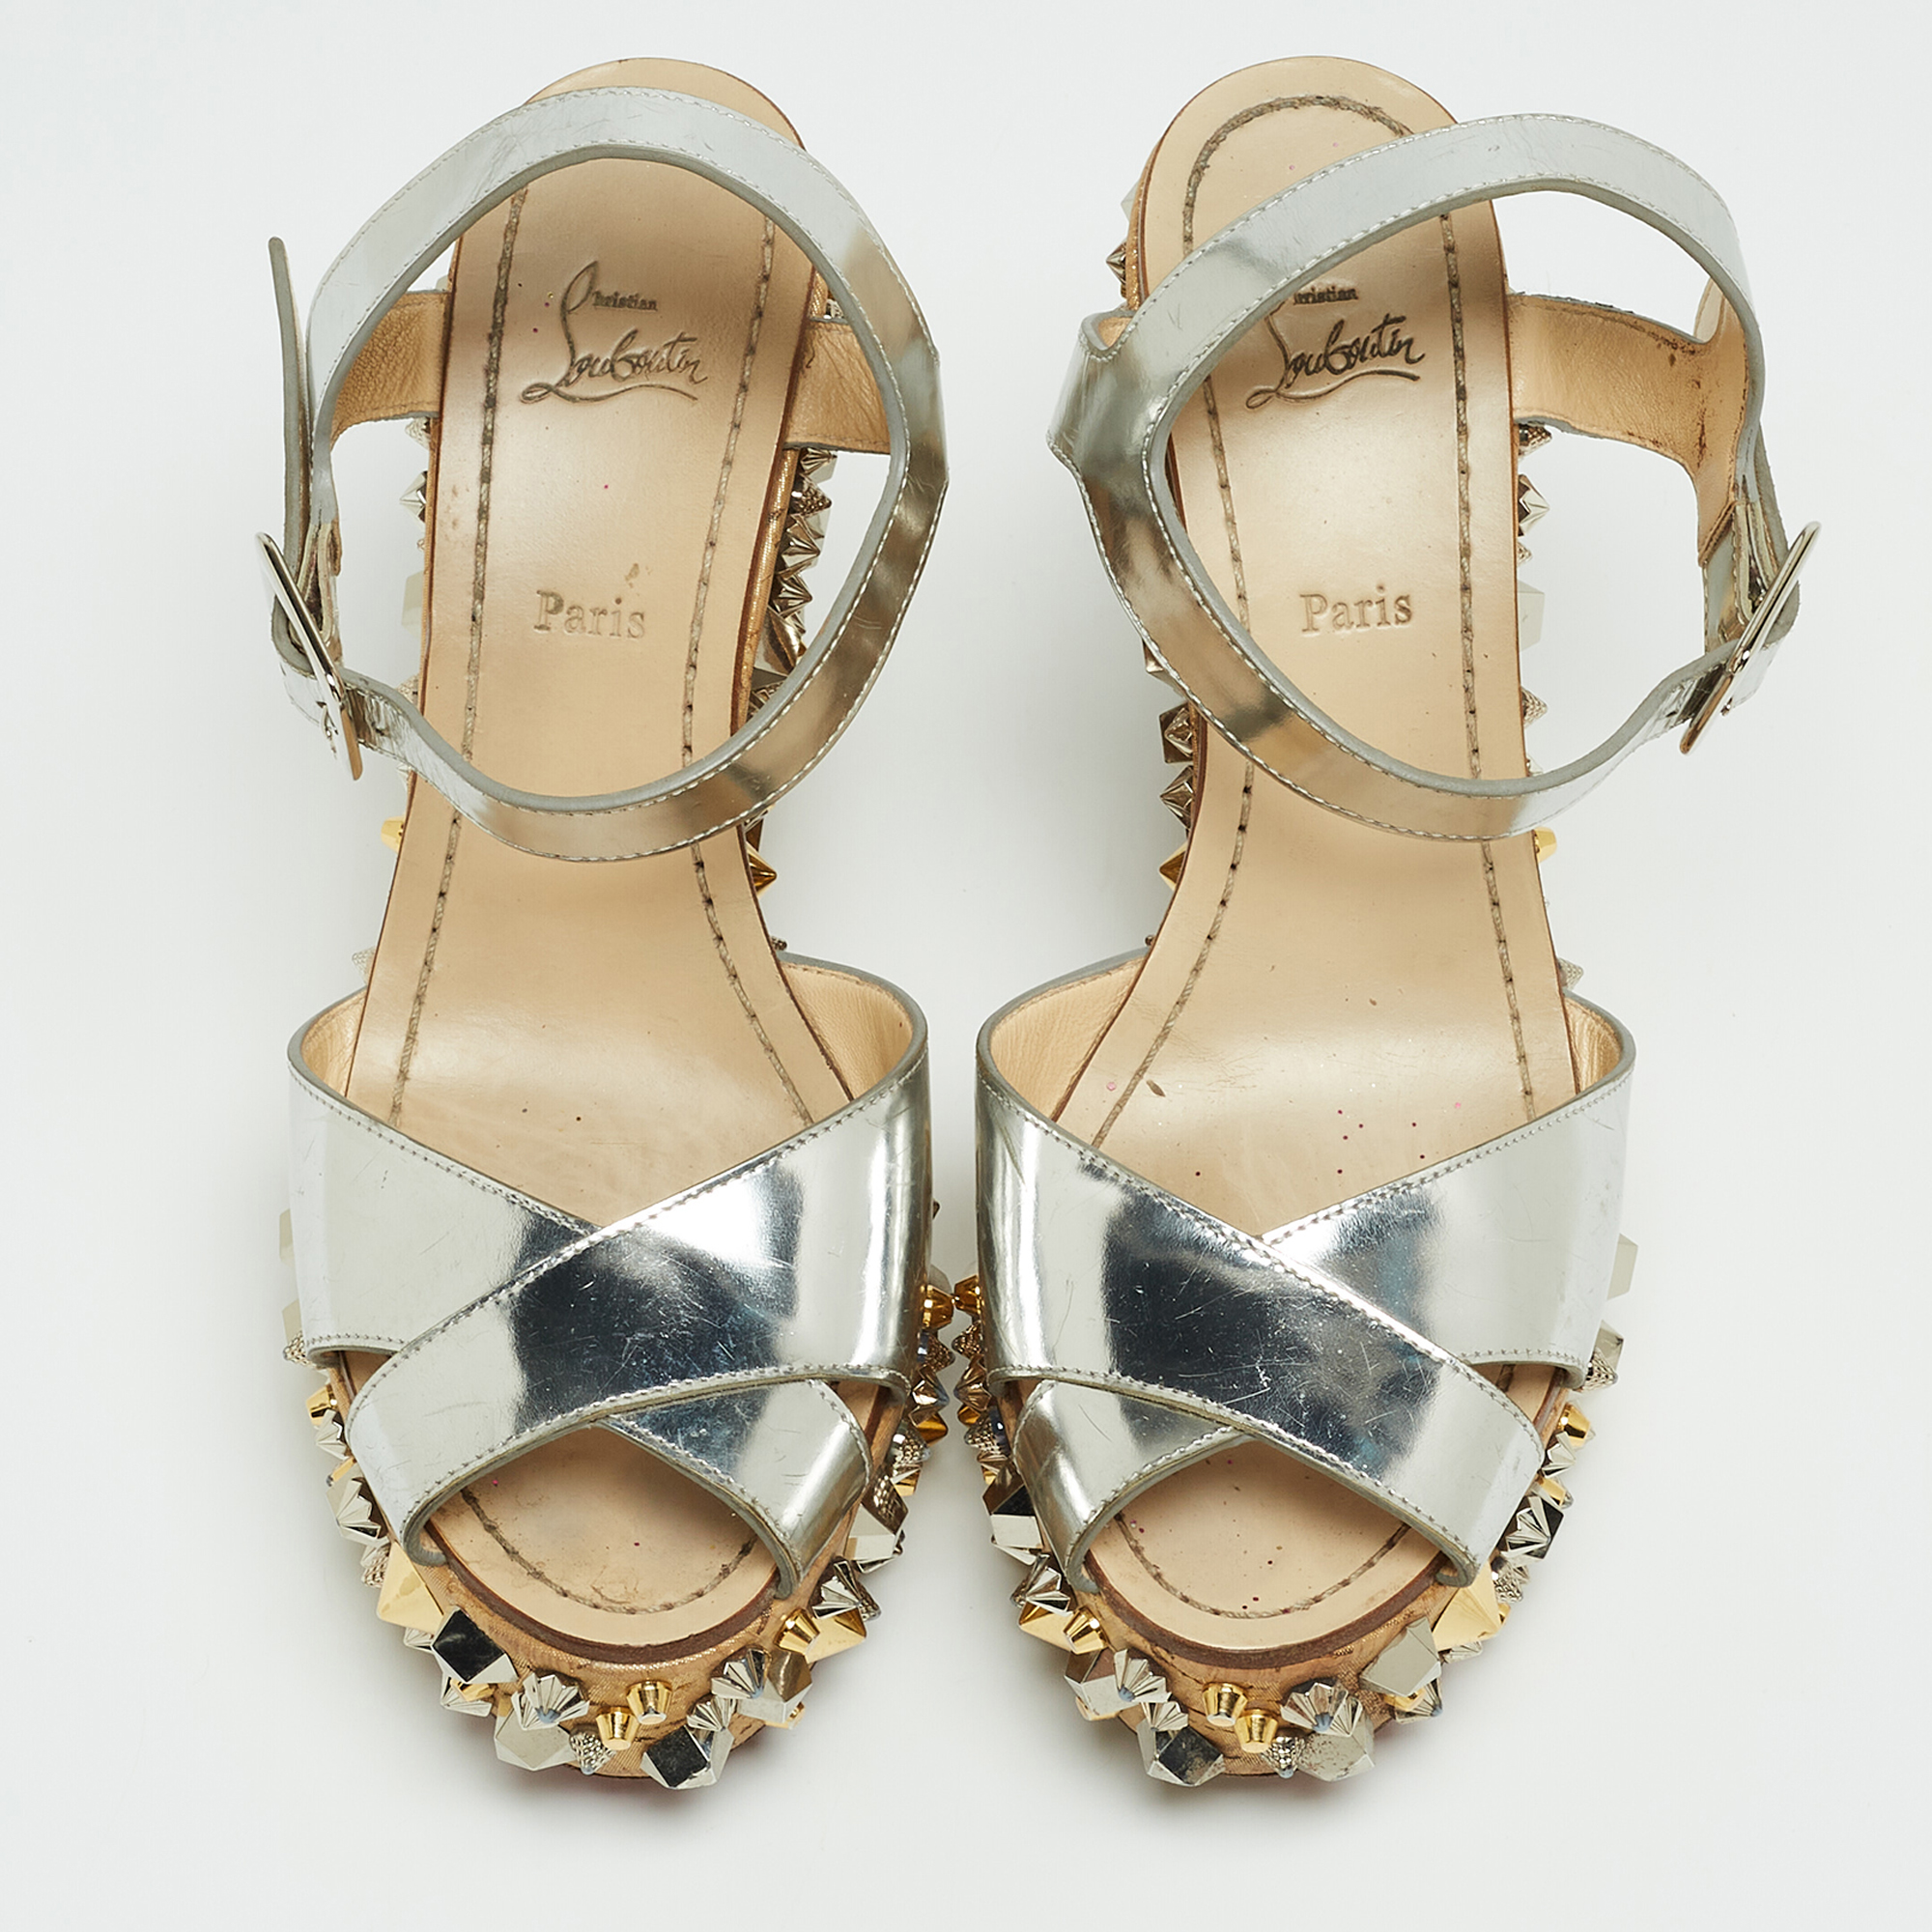 Christian Louboutin Silver Leather Almeria Wedge Sandals Size 37